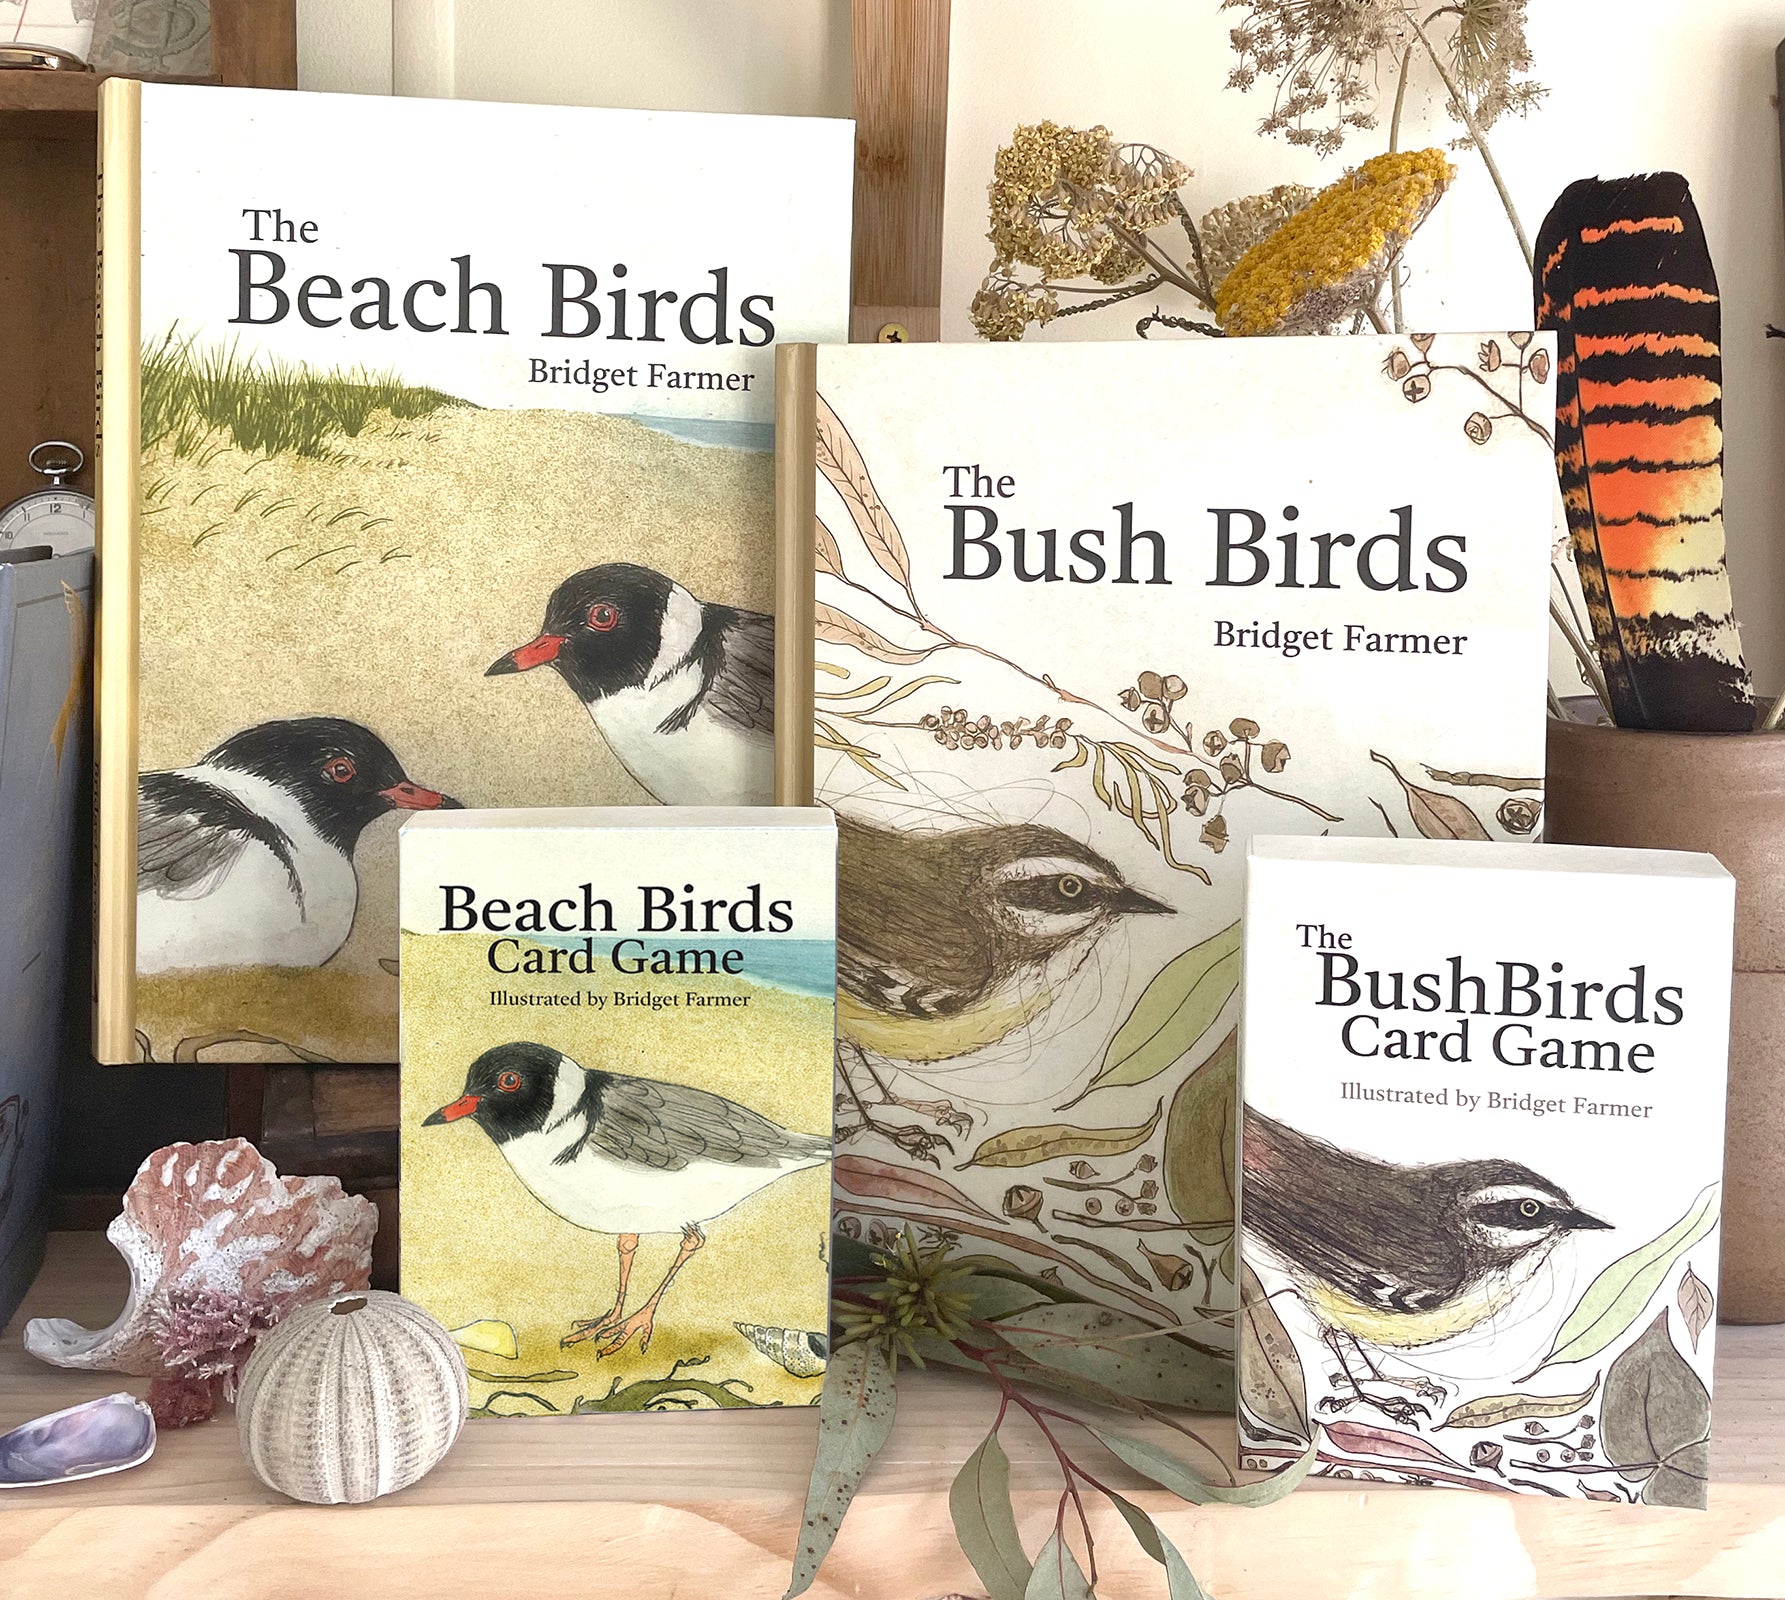 Books and Games Big BUNDLE - Both THE BEACH BIRDS and THE BUSH BIRDS Books and Games